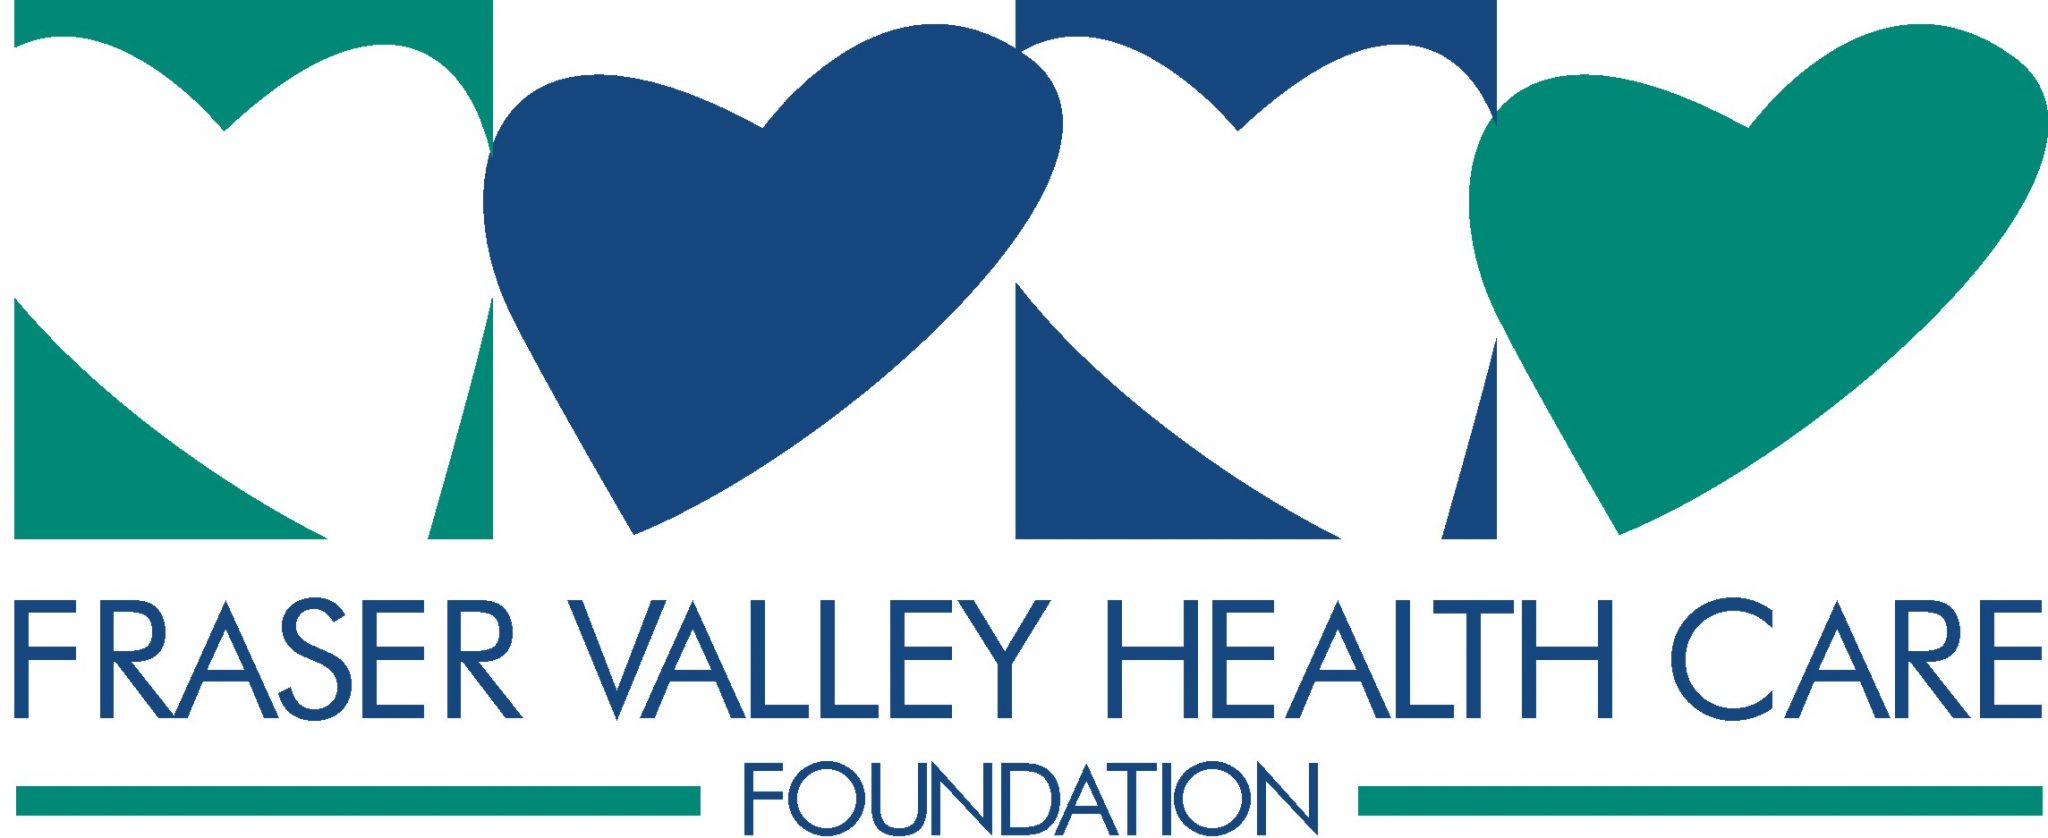 Fraser Valley Health Care Foundation continues to strengthen board of directors